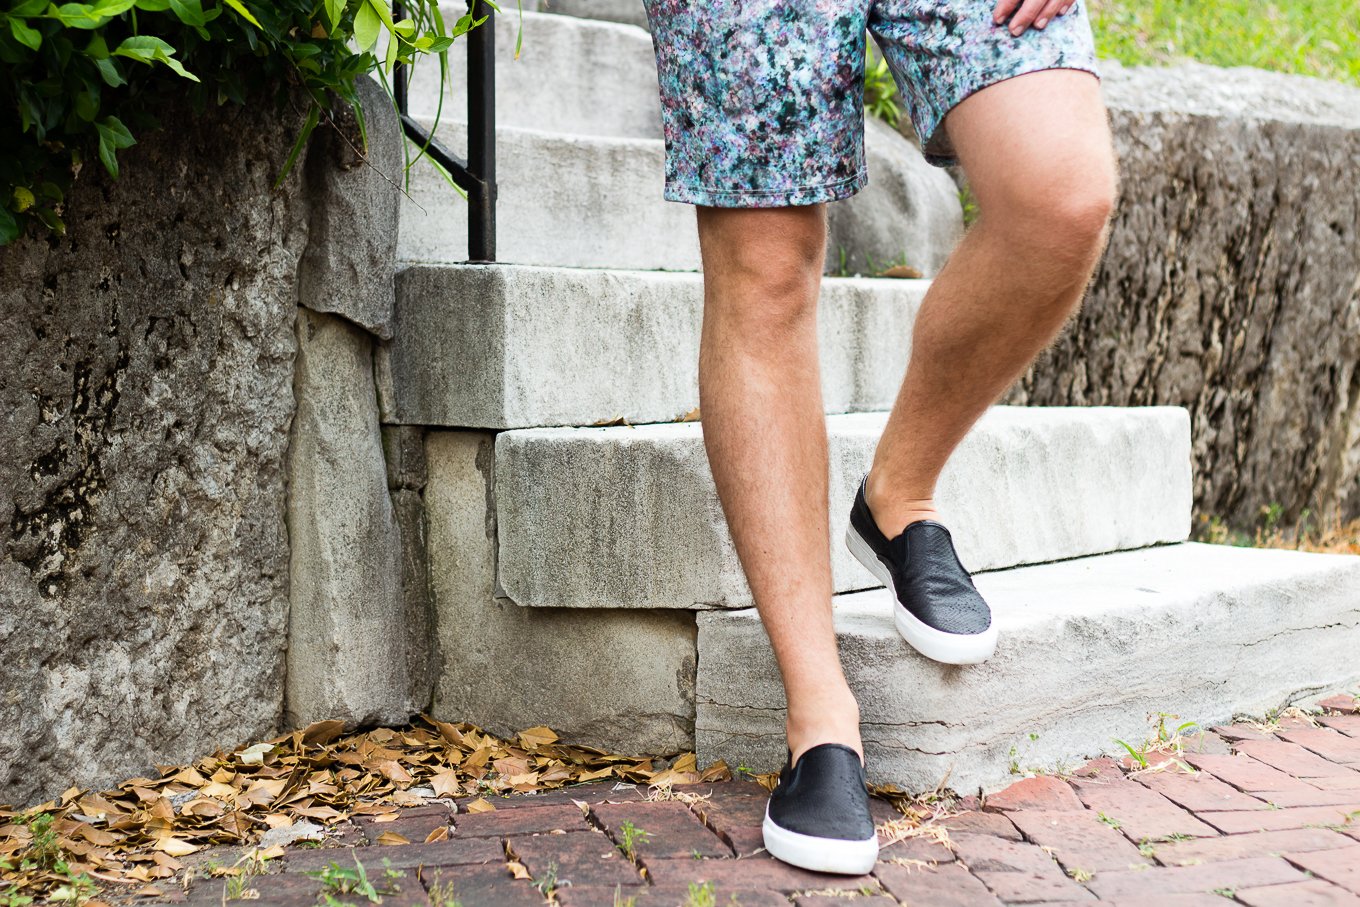 unif, topman, how to wear shorts with t-shirt, sperry, mens fashion